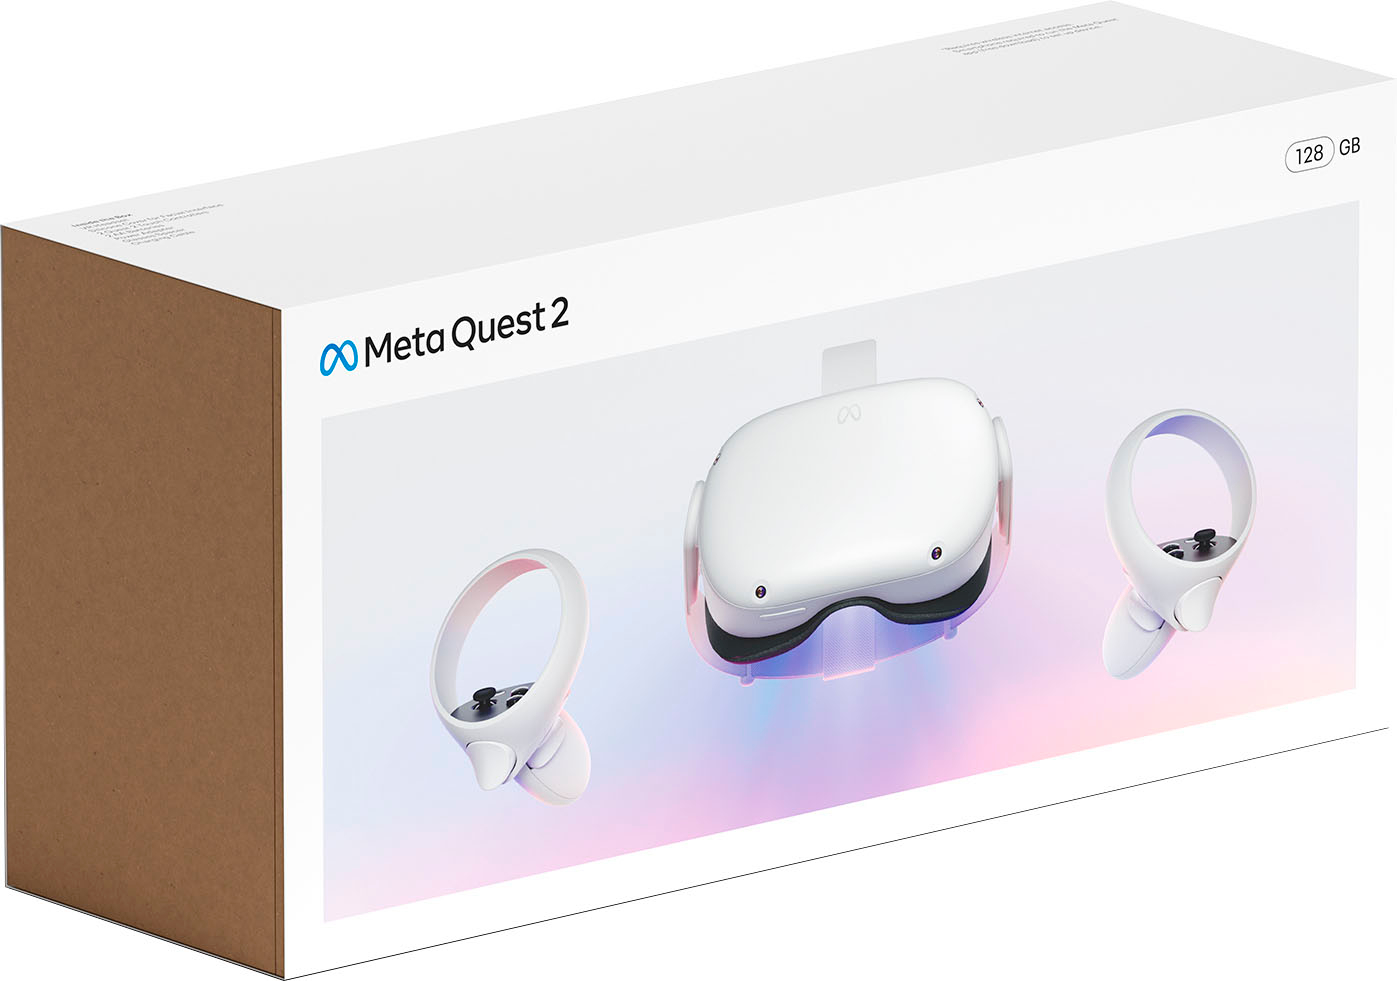 PC/タブレット PC周辺機器 Meta Quest 2 Advanced All-In-One Virtual Reality Headset 256GB 301 